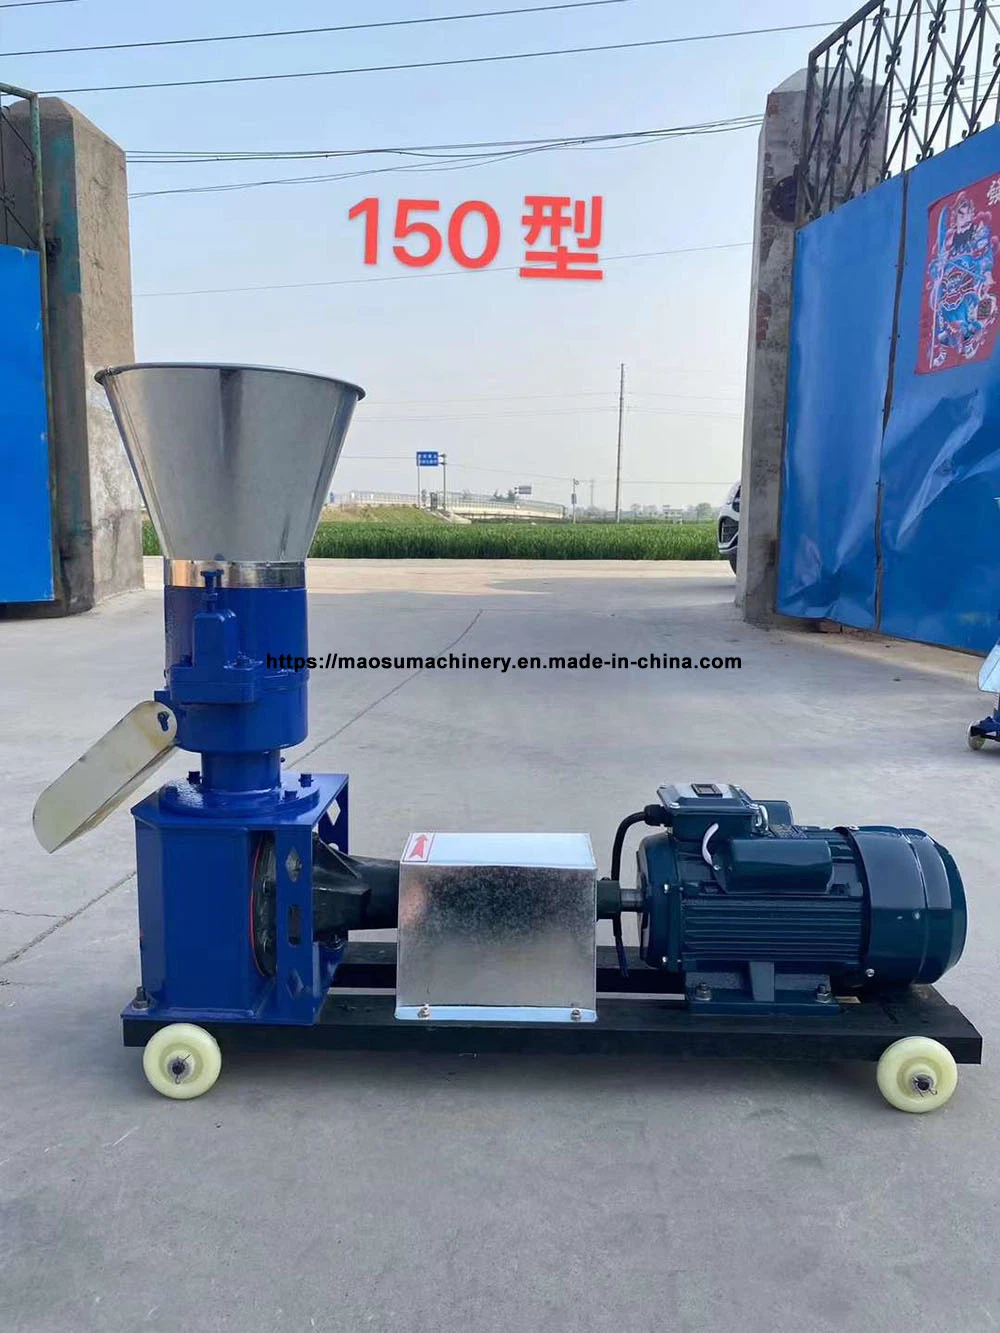 0.1-5 Ton Per Hour Poultry Livestock Animal Feed Pellet Mill